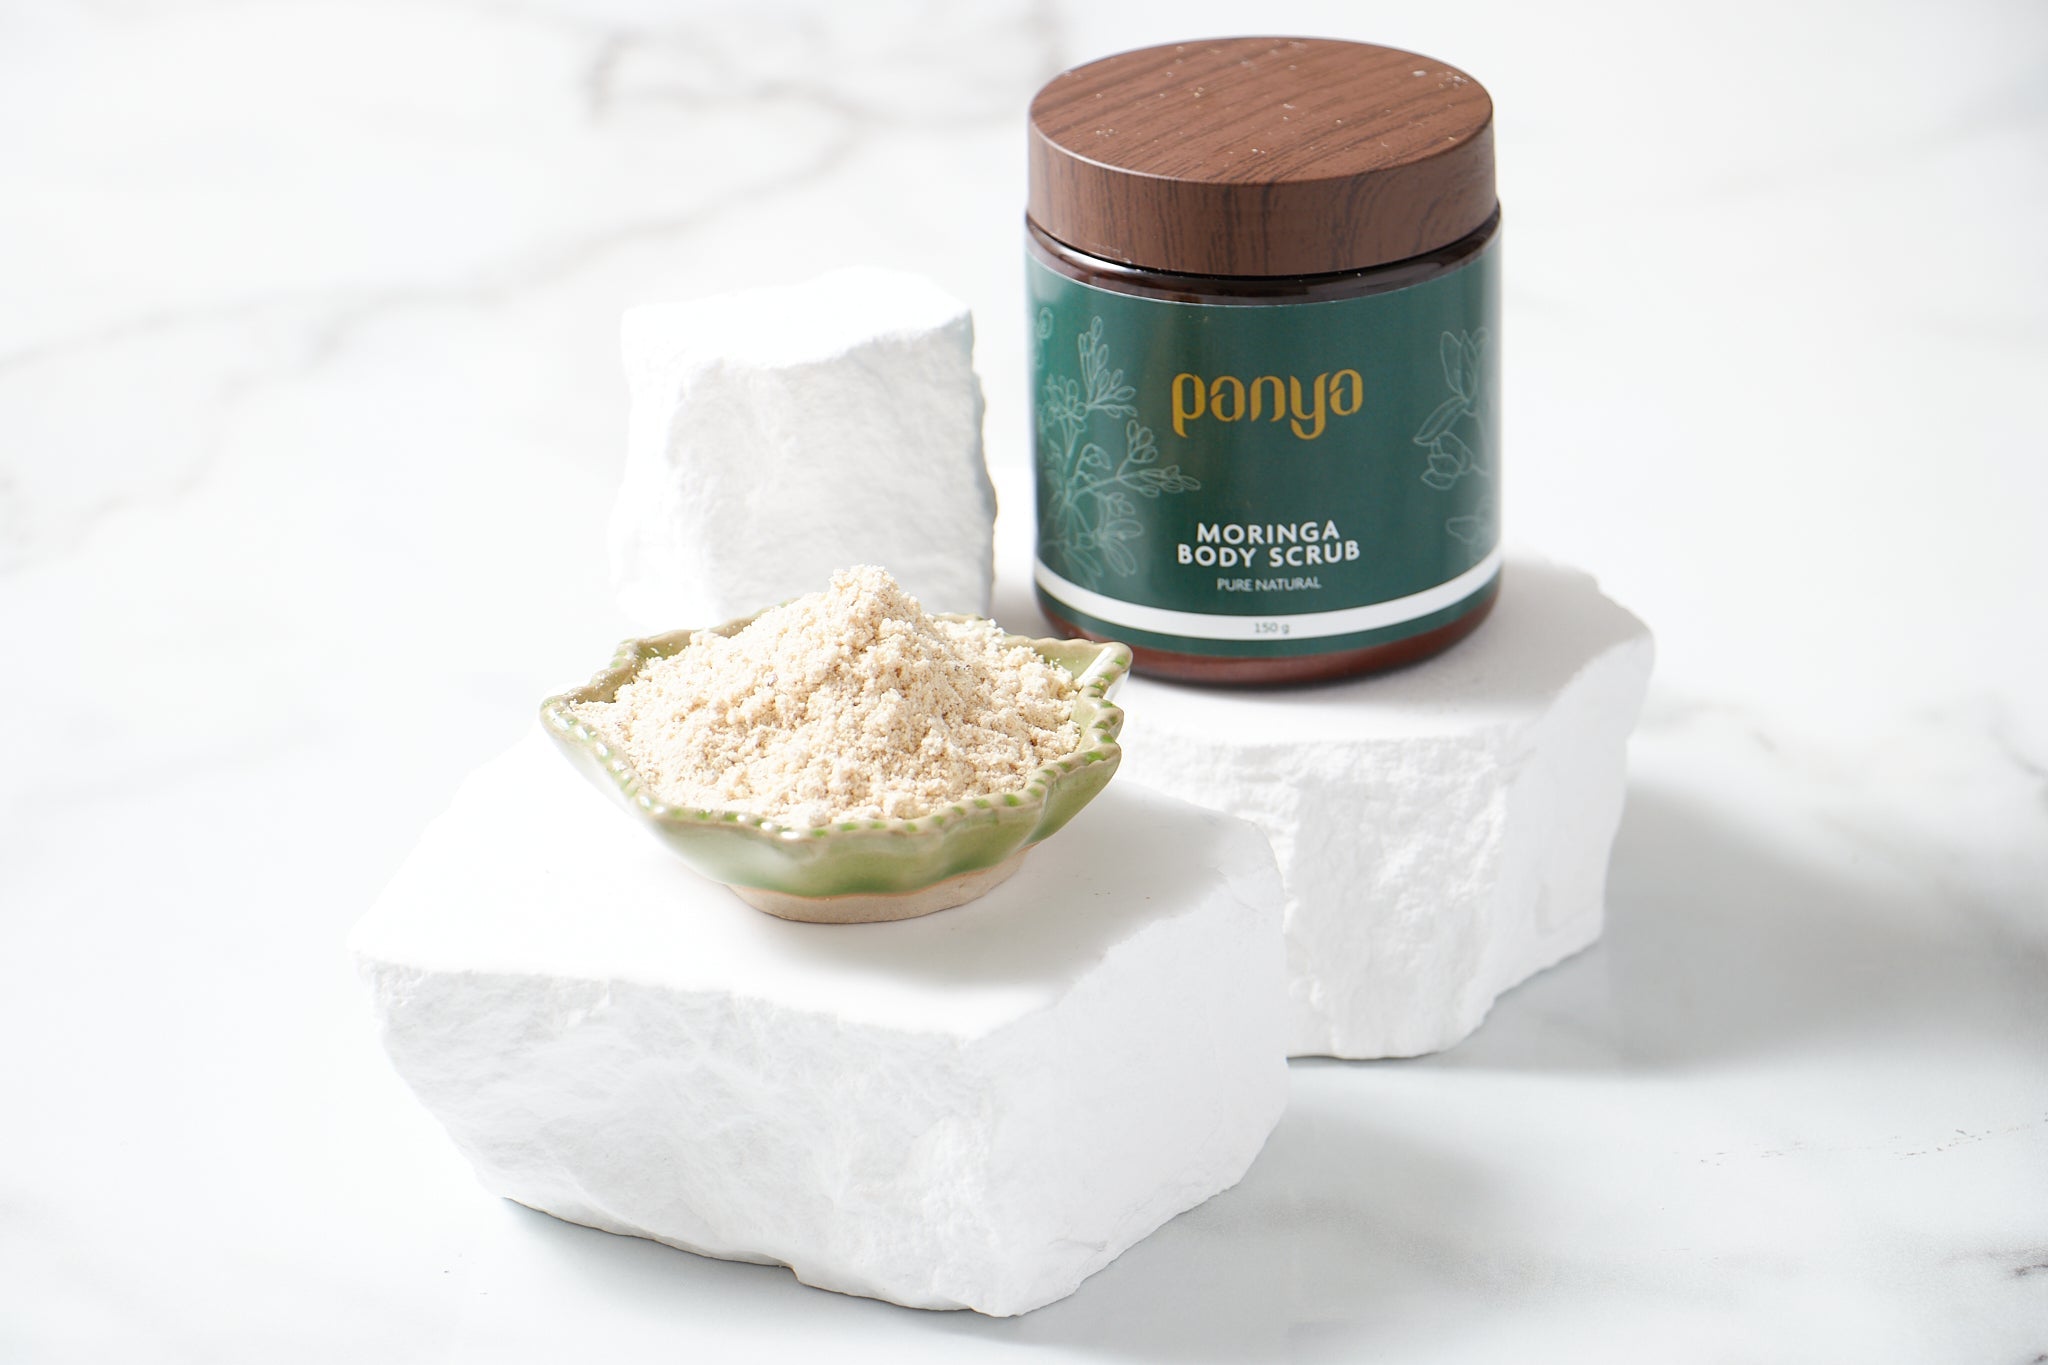 Panya Moringa Body Scrub: Gentle exfoliant for all skin types made from 100% finely ground moringa husk, rich in vitamins c & e.